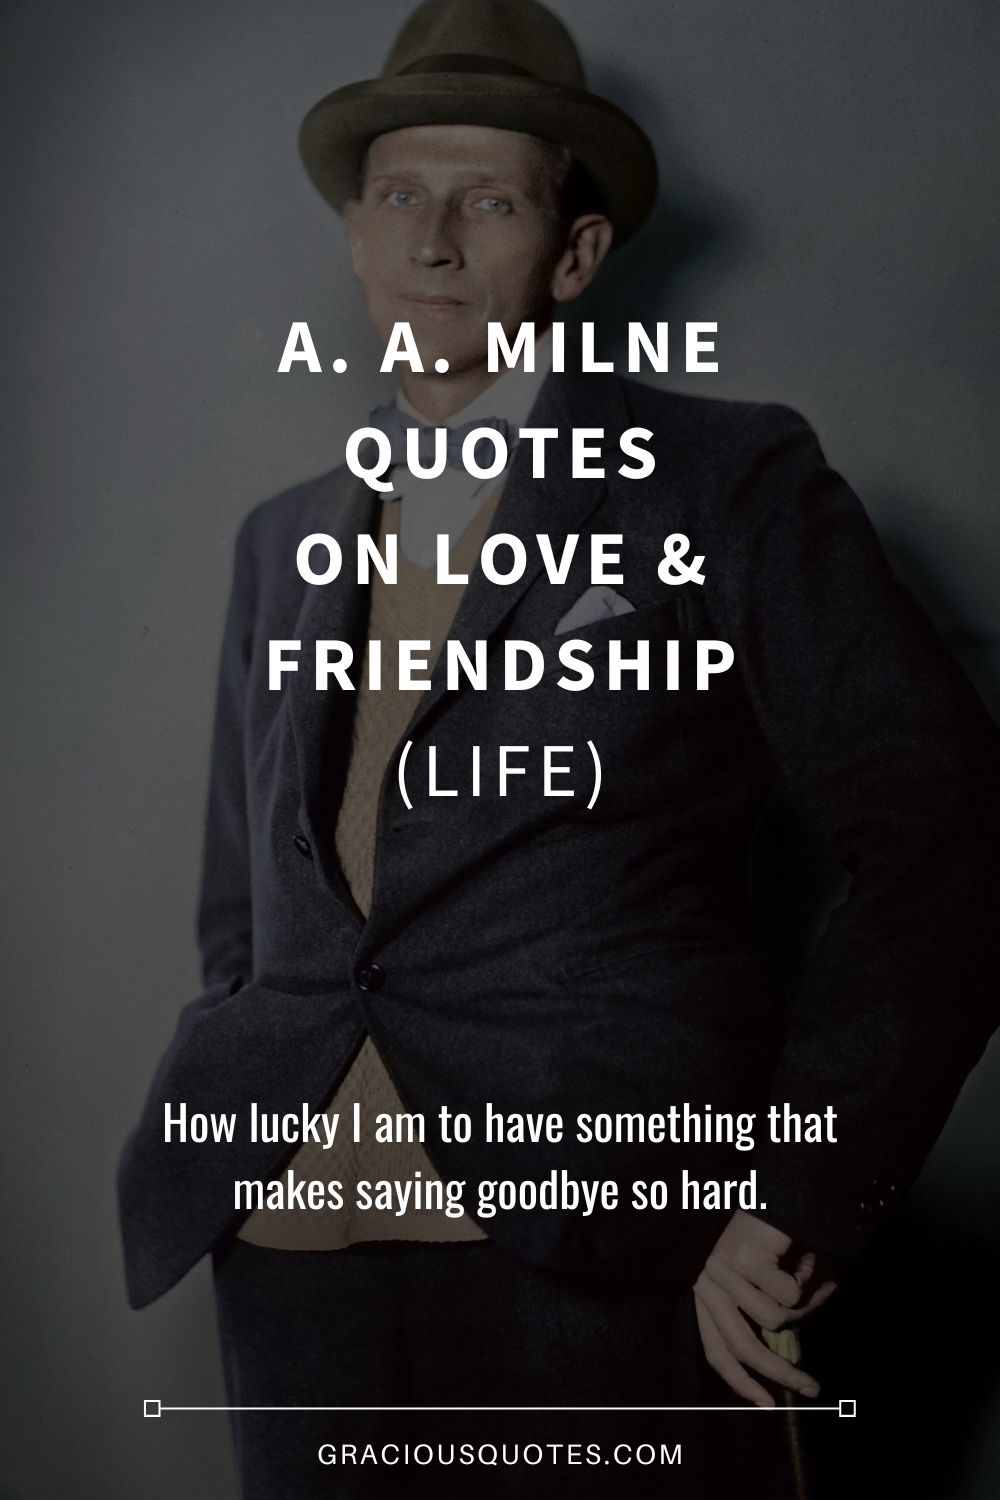 A. A. Milne Quotes on Love & Friendship (LIFE) - Gracious Quotes